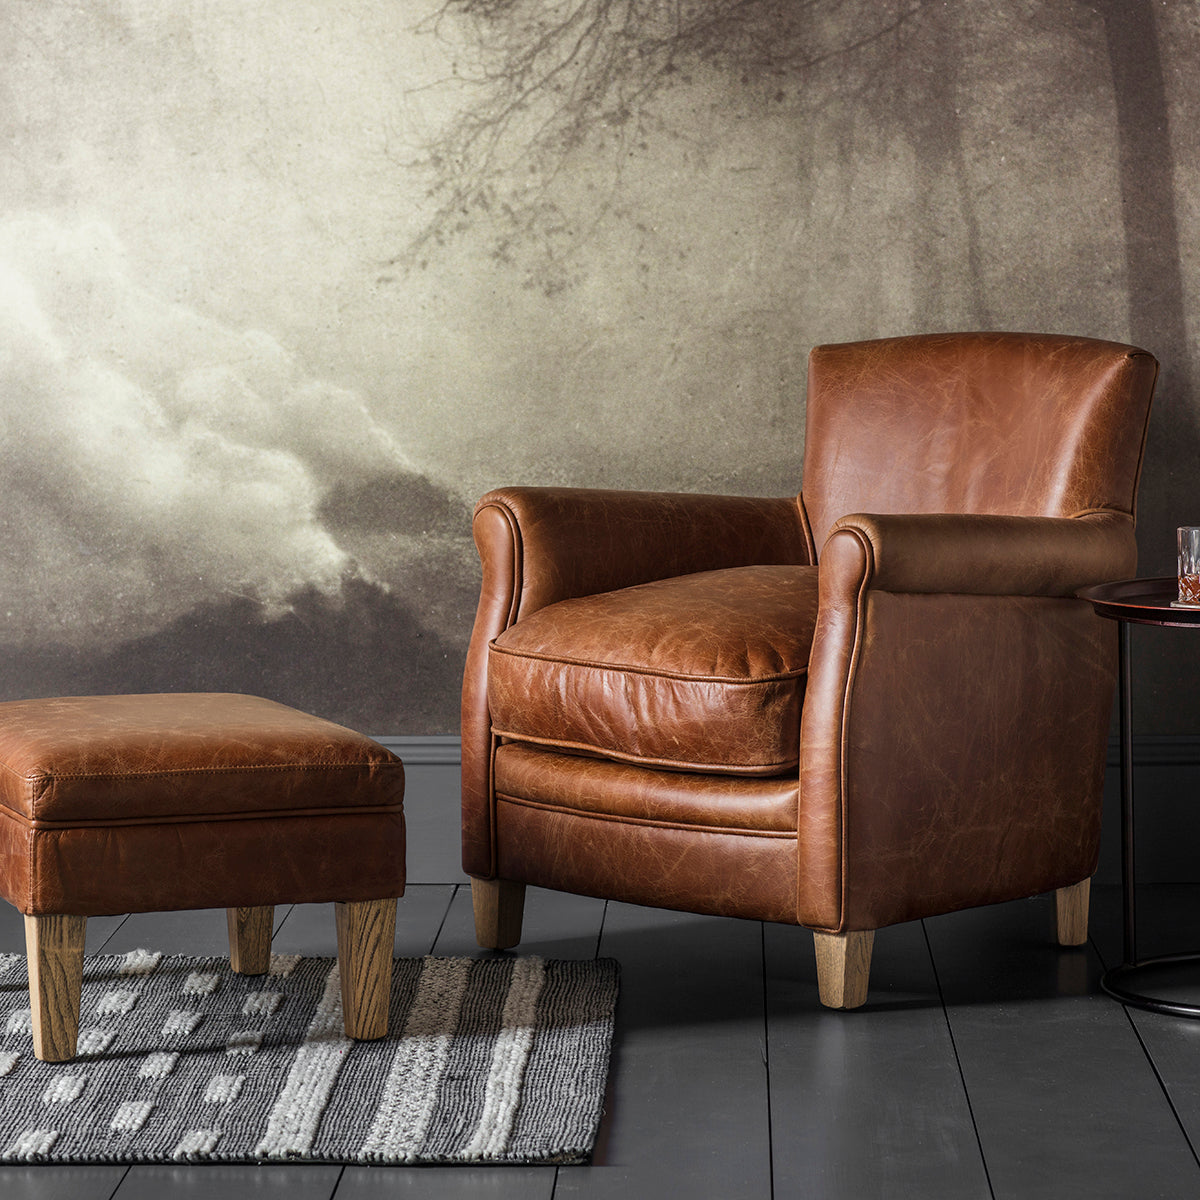 A vintage brown leather chair and ottoman from Kikiathome.co.uk, showcasing home furniture and interior decor, placed in front of a wall.